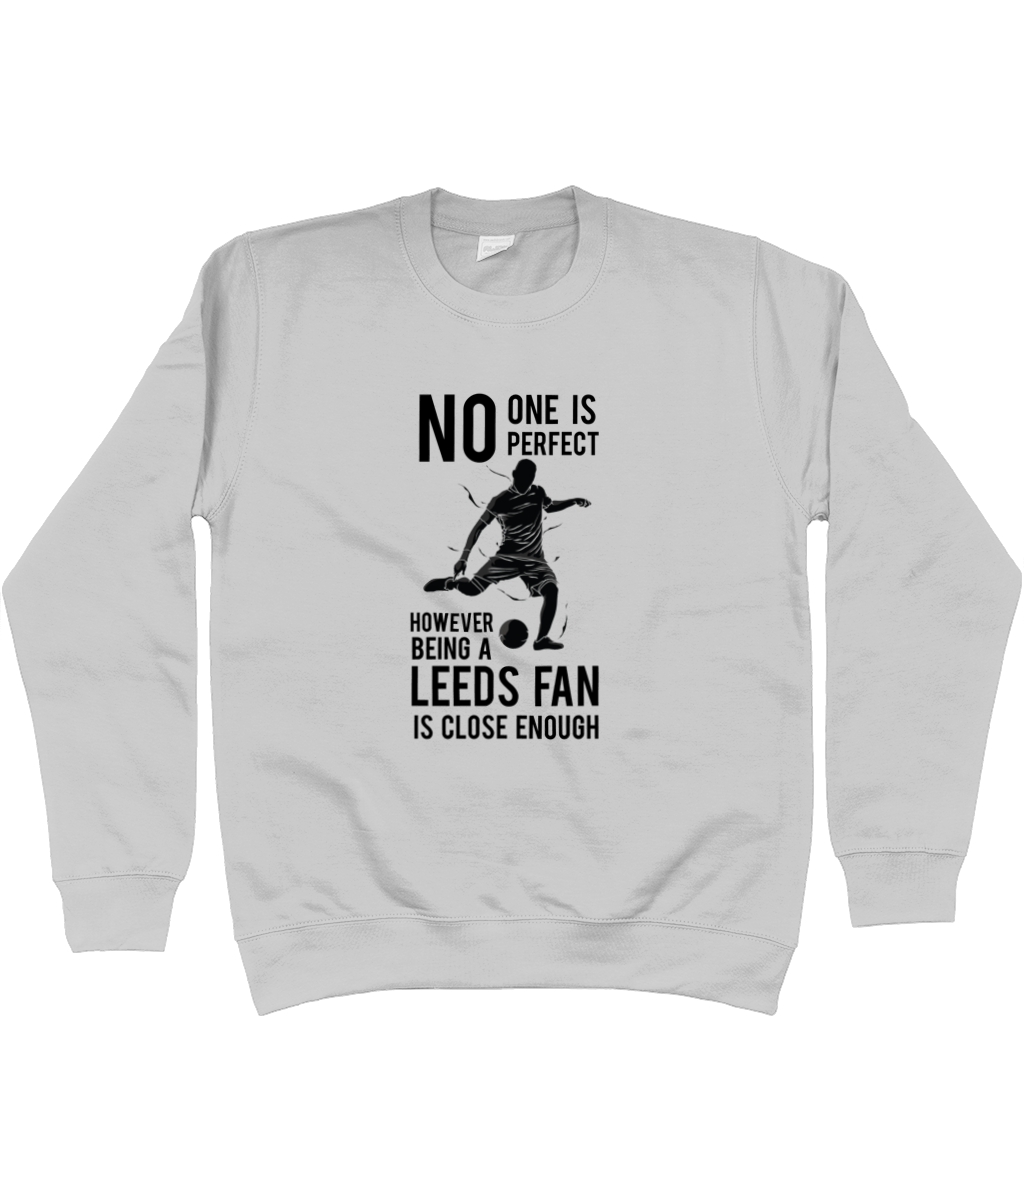 No One Is Perfect However Being A Leeds Fan Is Close Enough Jumper Women